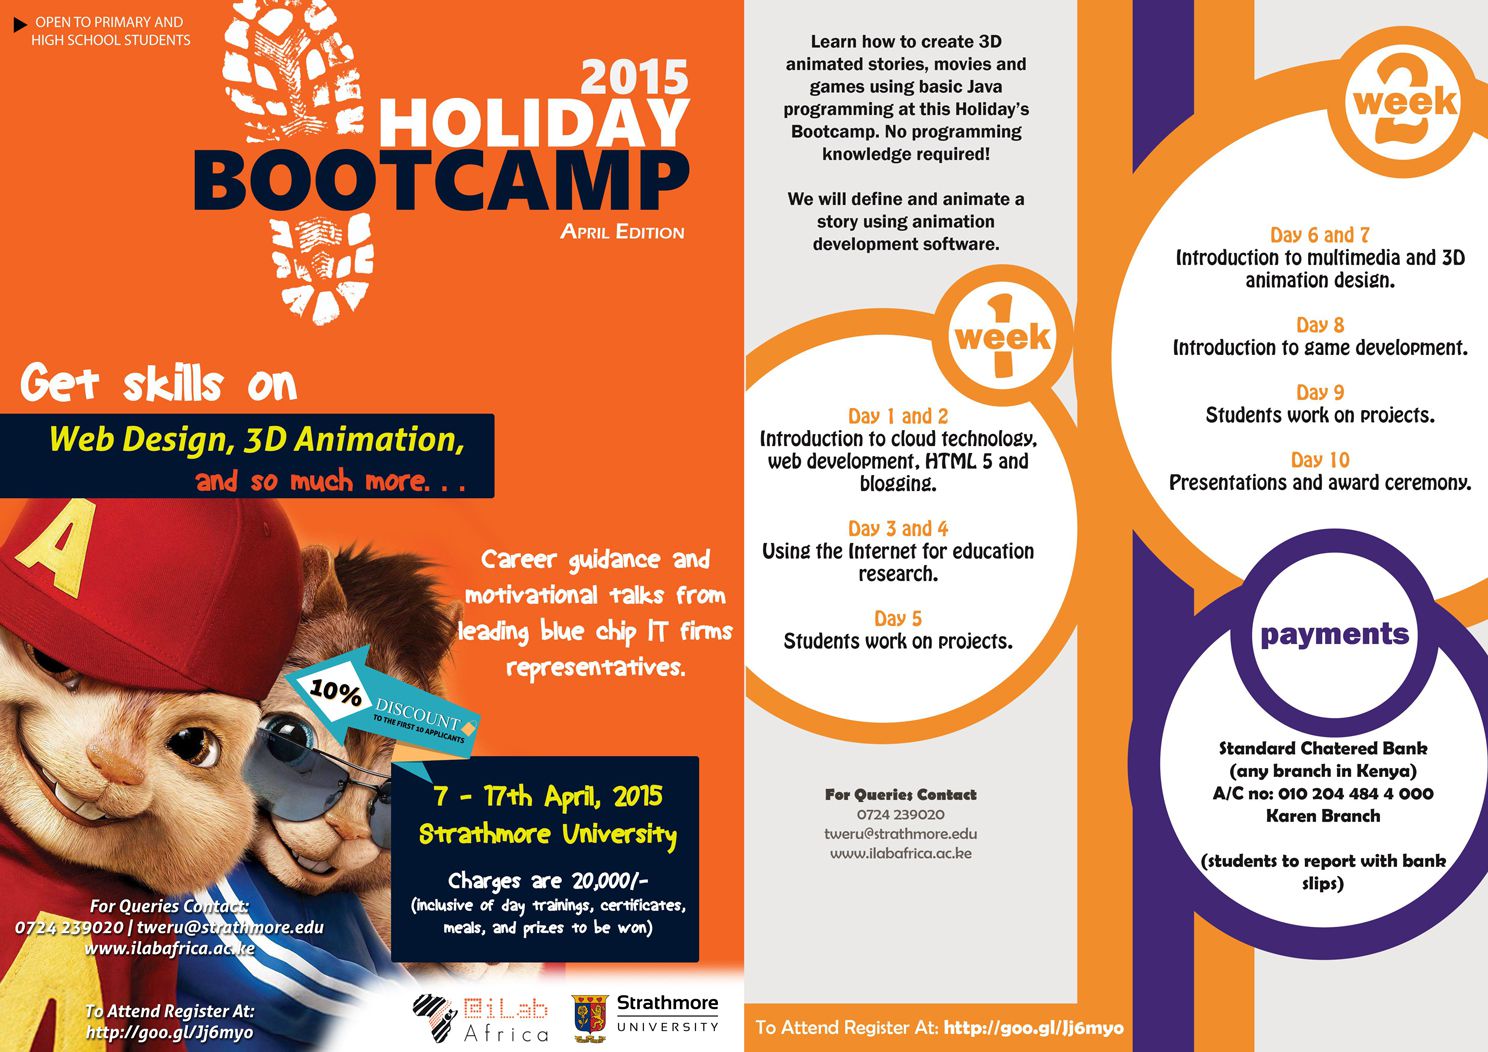 [image] Details about the @iLabAfrica upcoming 9-day Holiday Boot Camp